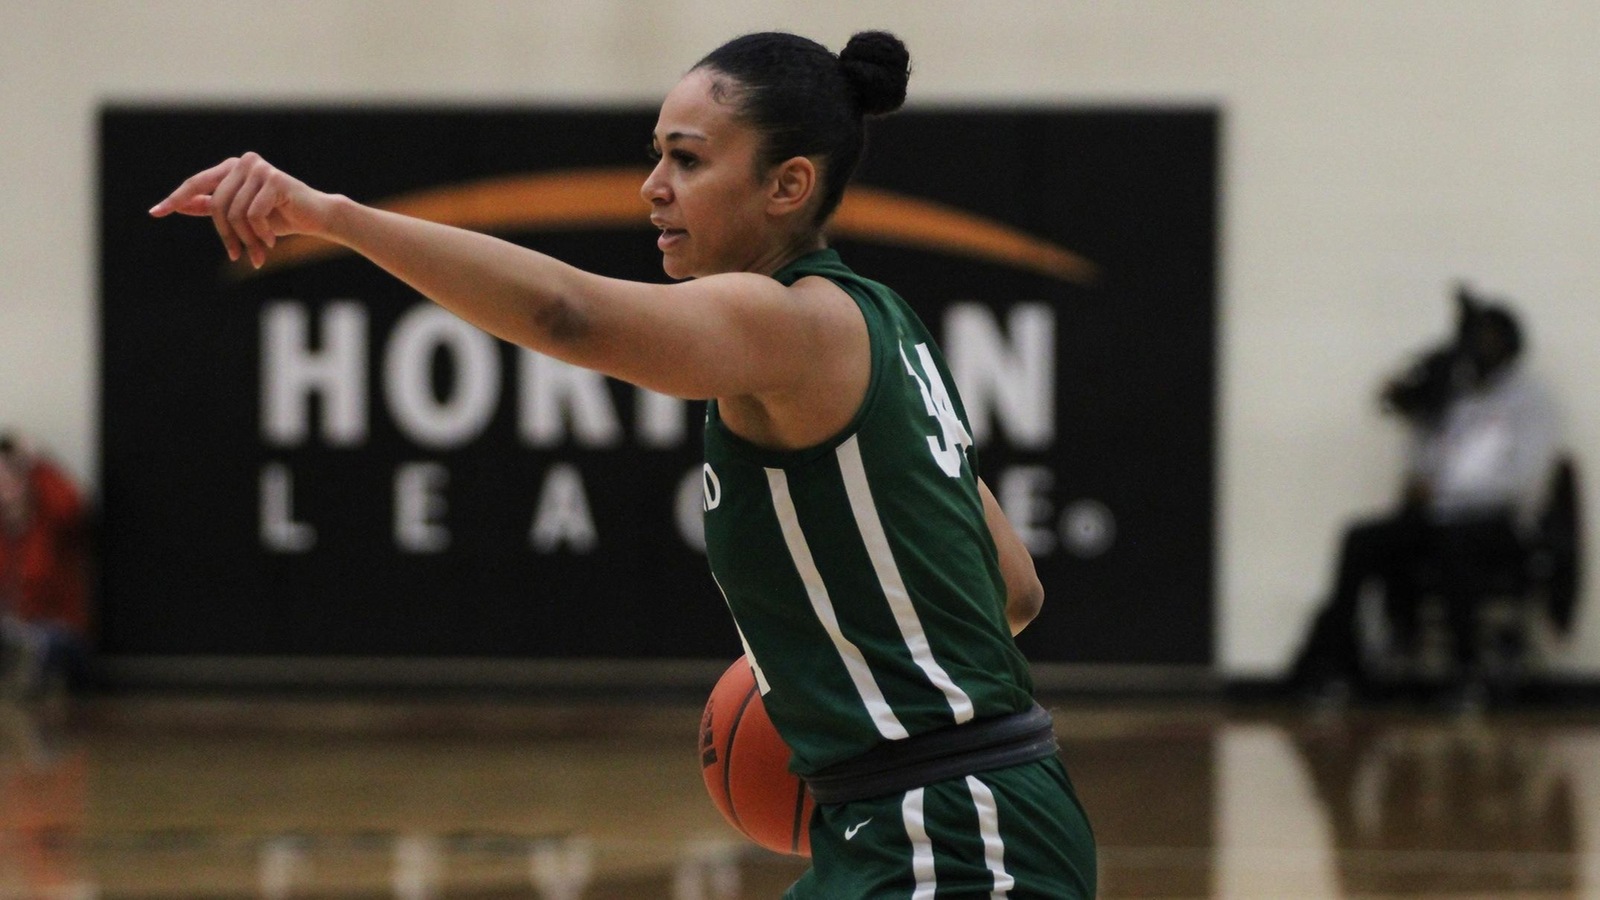 Cleveland State Women’s Basketball Notches 23rd Win With 83-59 Victory At IUPUI